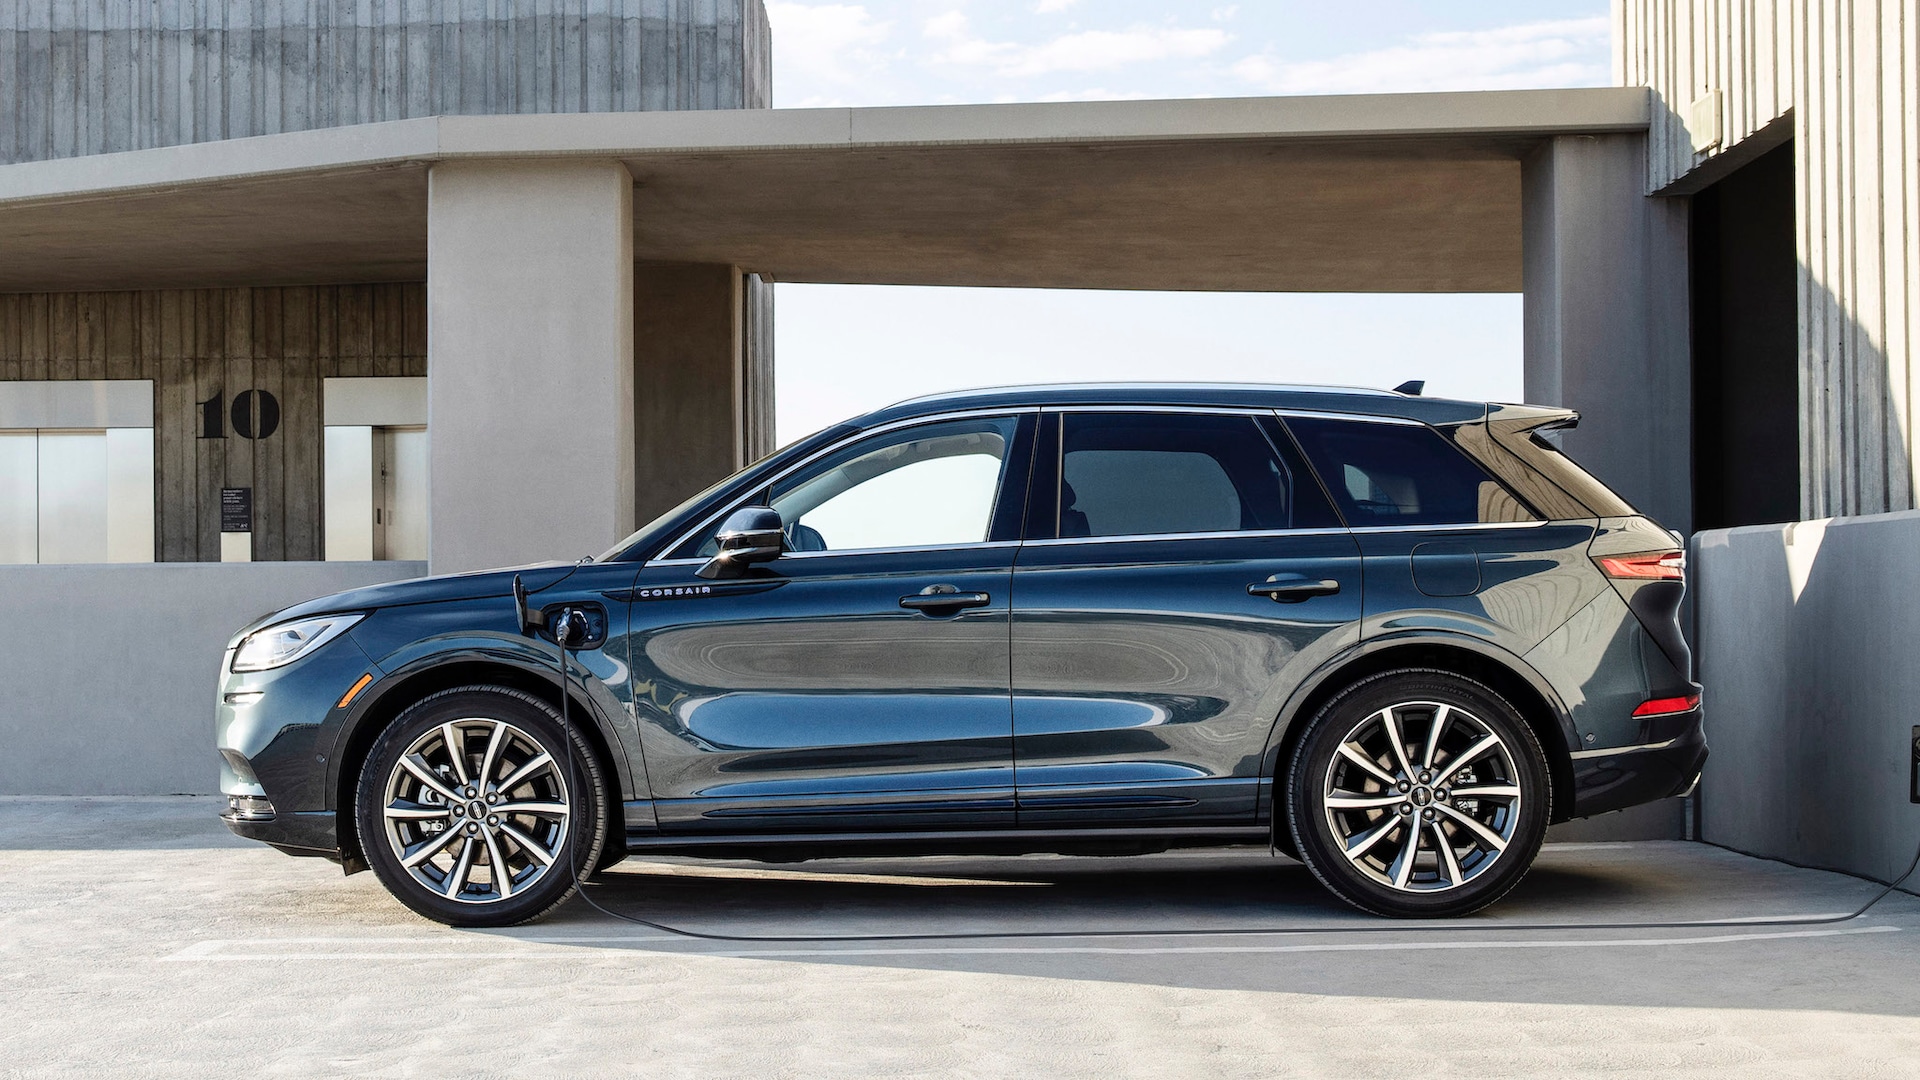 2021 Lincoln Corsair Grand Touring: The Plug-In-Hybrid One